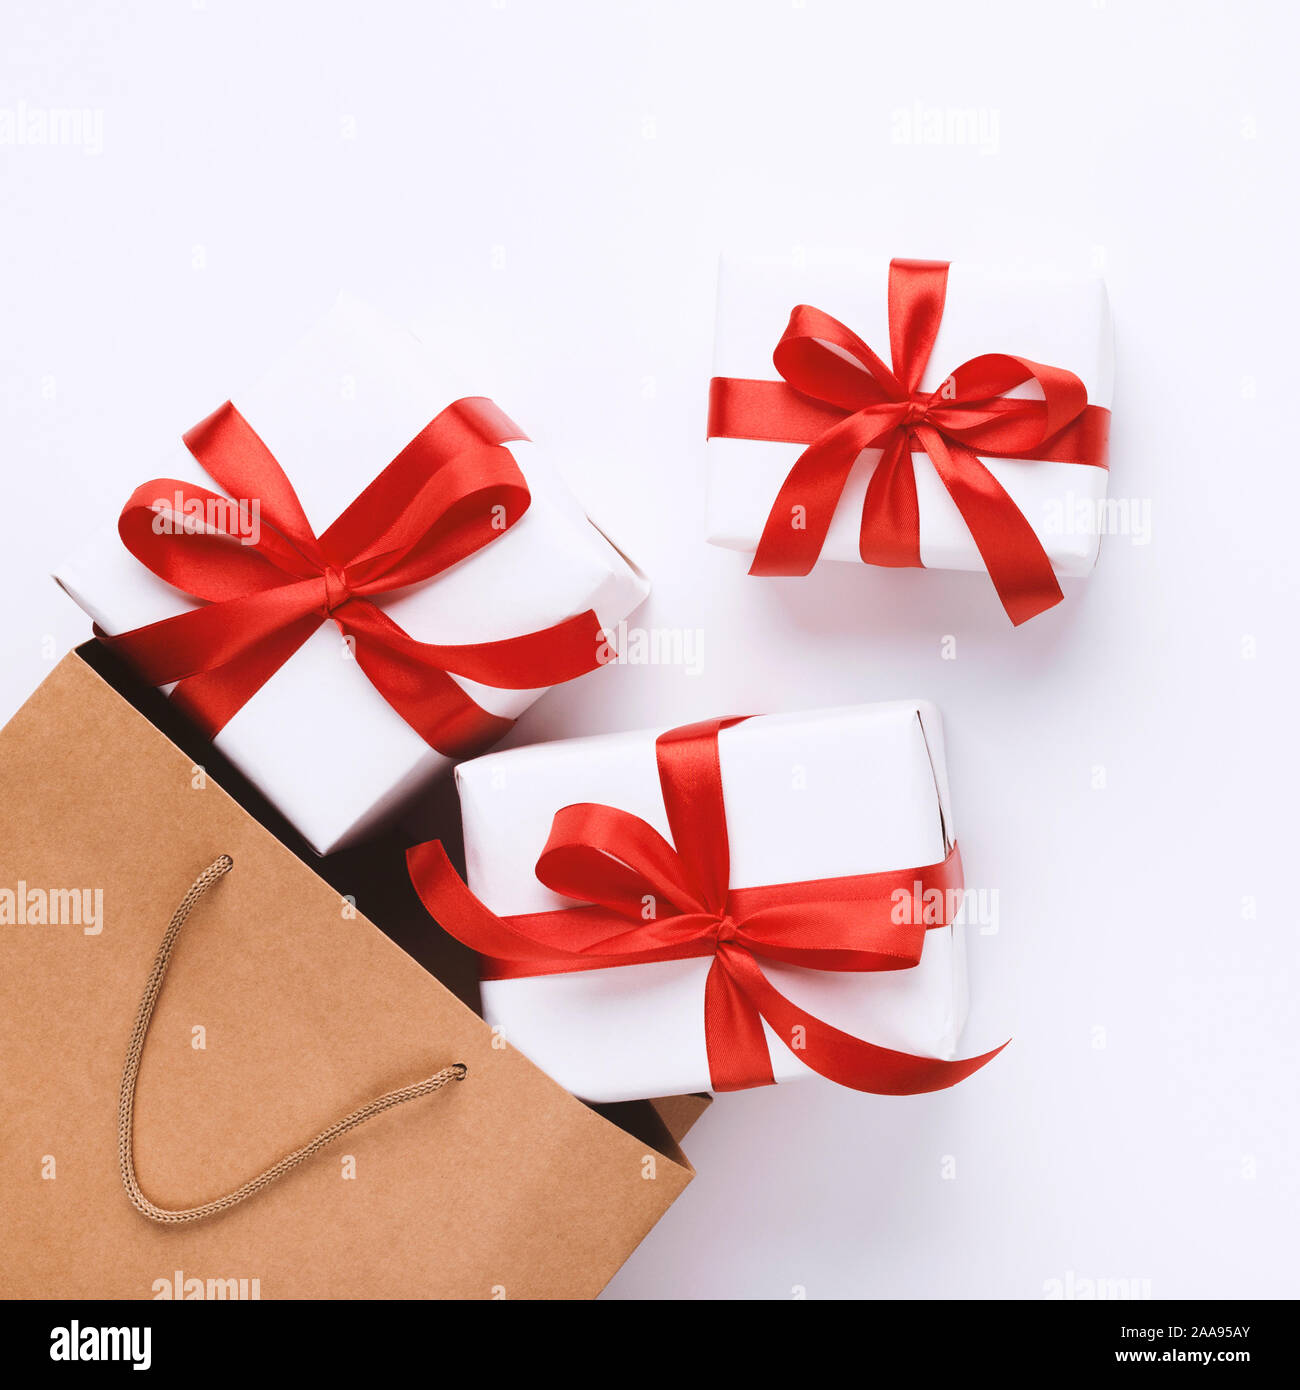 Many Christmas gifts with red ribbons and shopping bag Stock Photo